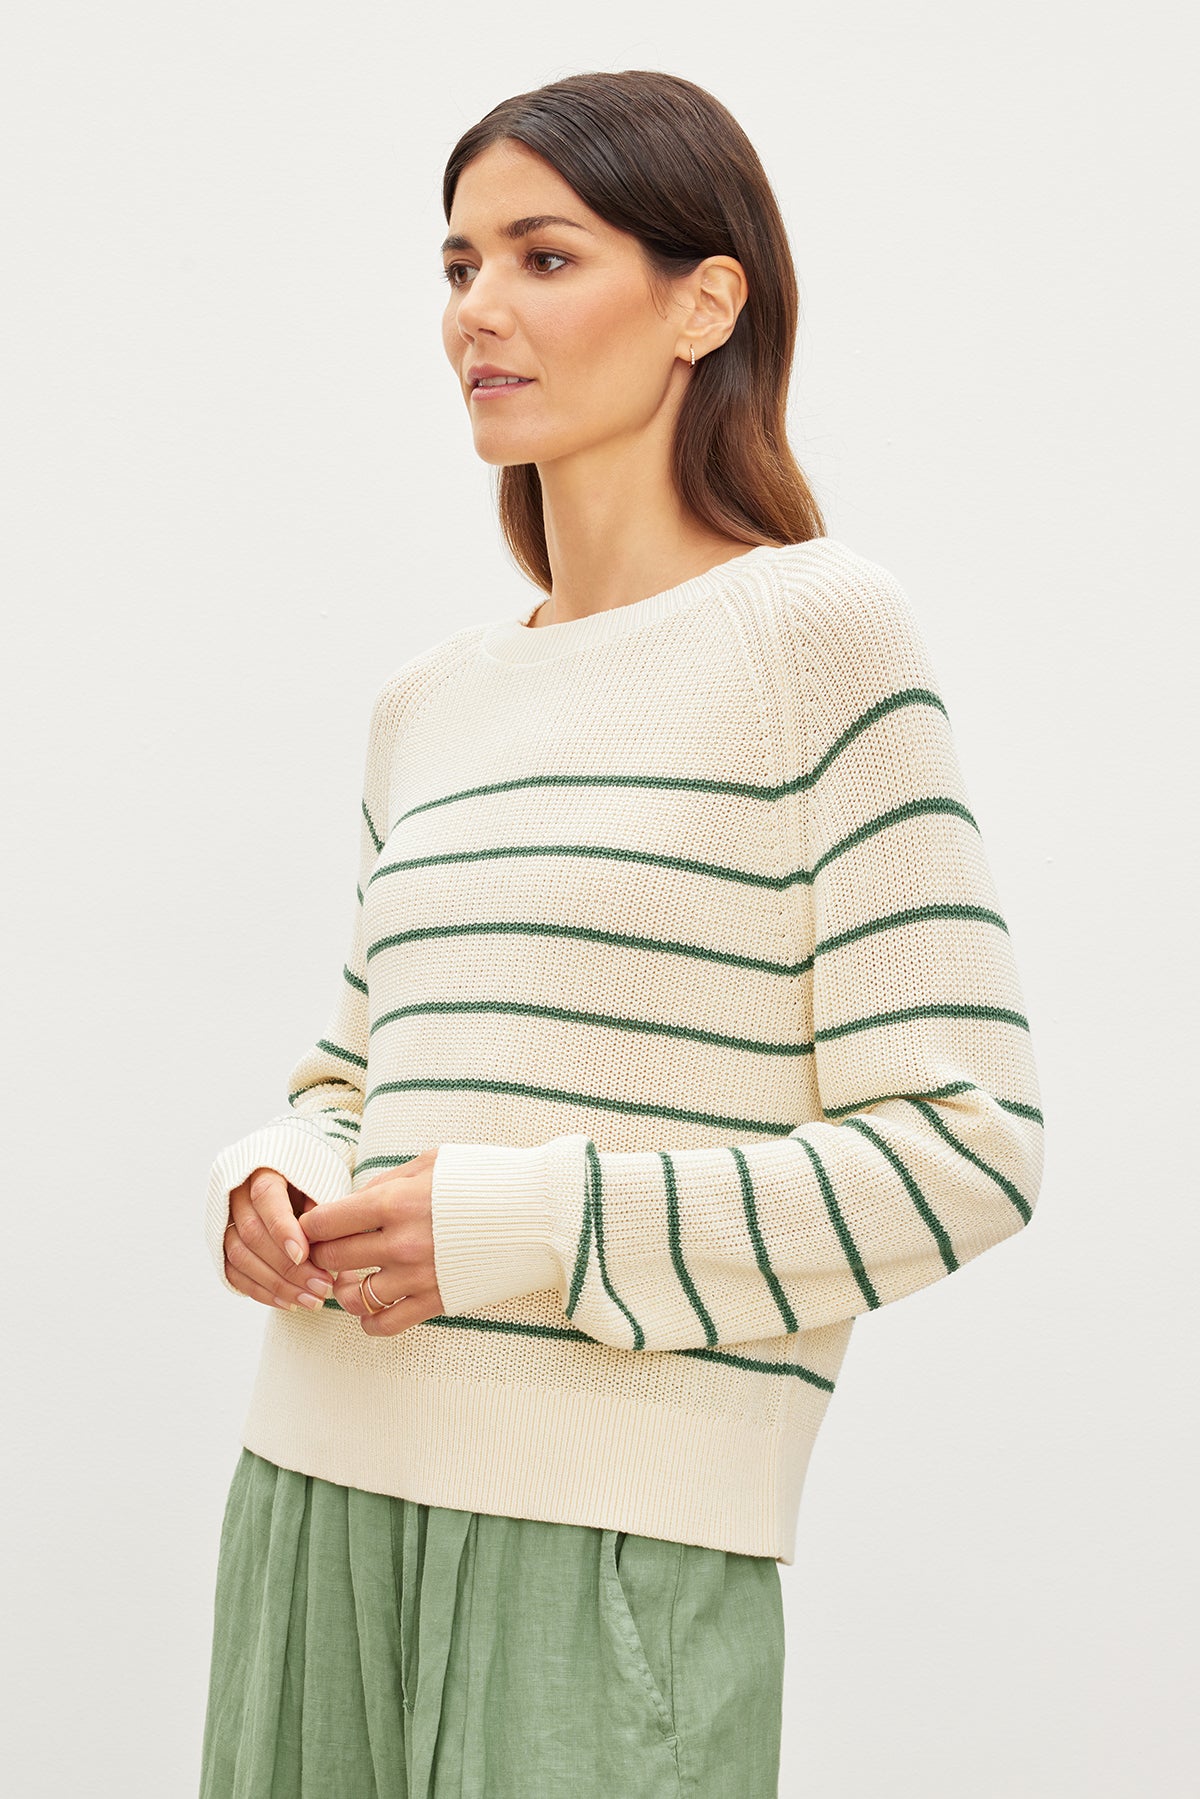   The model is wearing a Velvet by Graham & Spencer CHAYSE STRIPED CREW NECK SWEATER. 